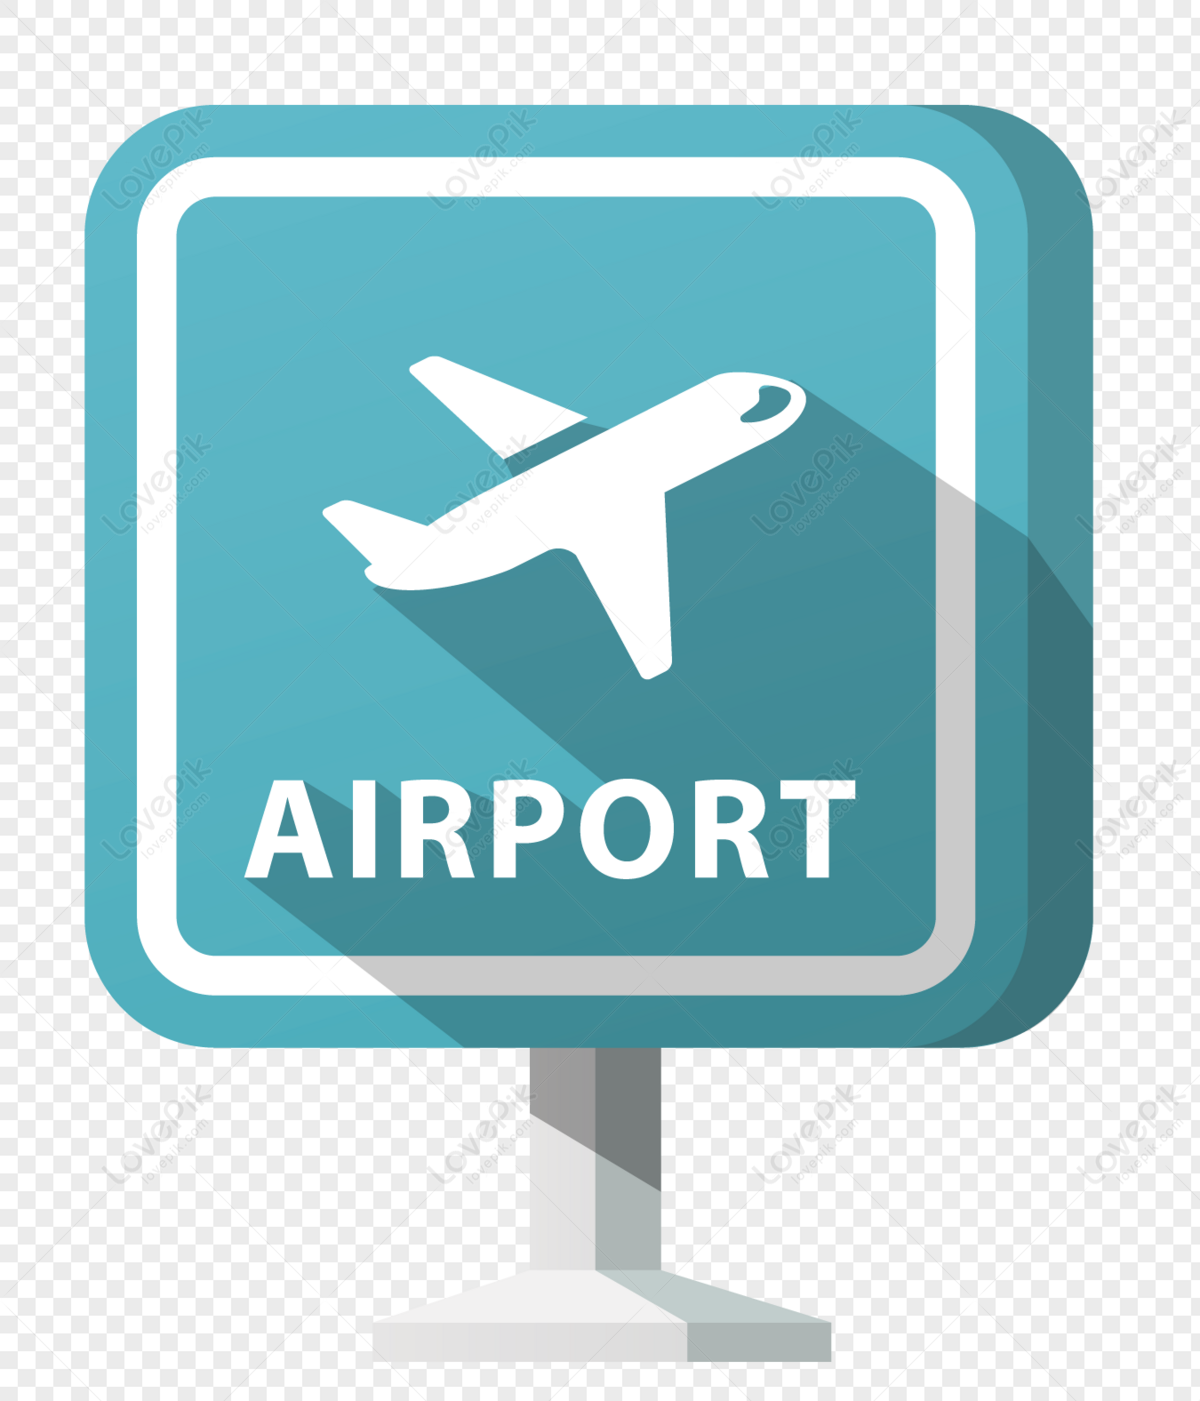 Airport signs, material, illustration, airport png image free download